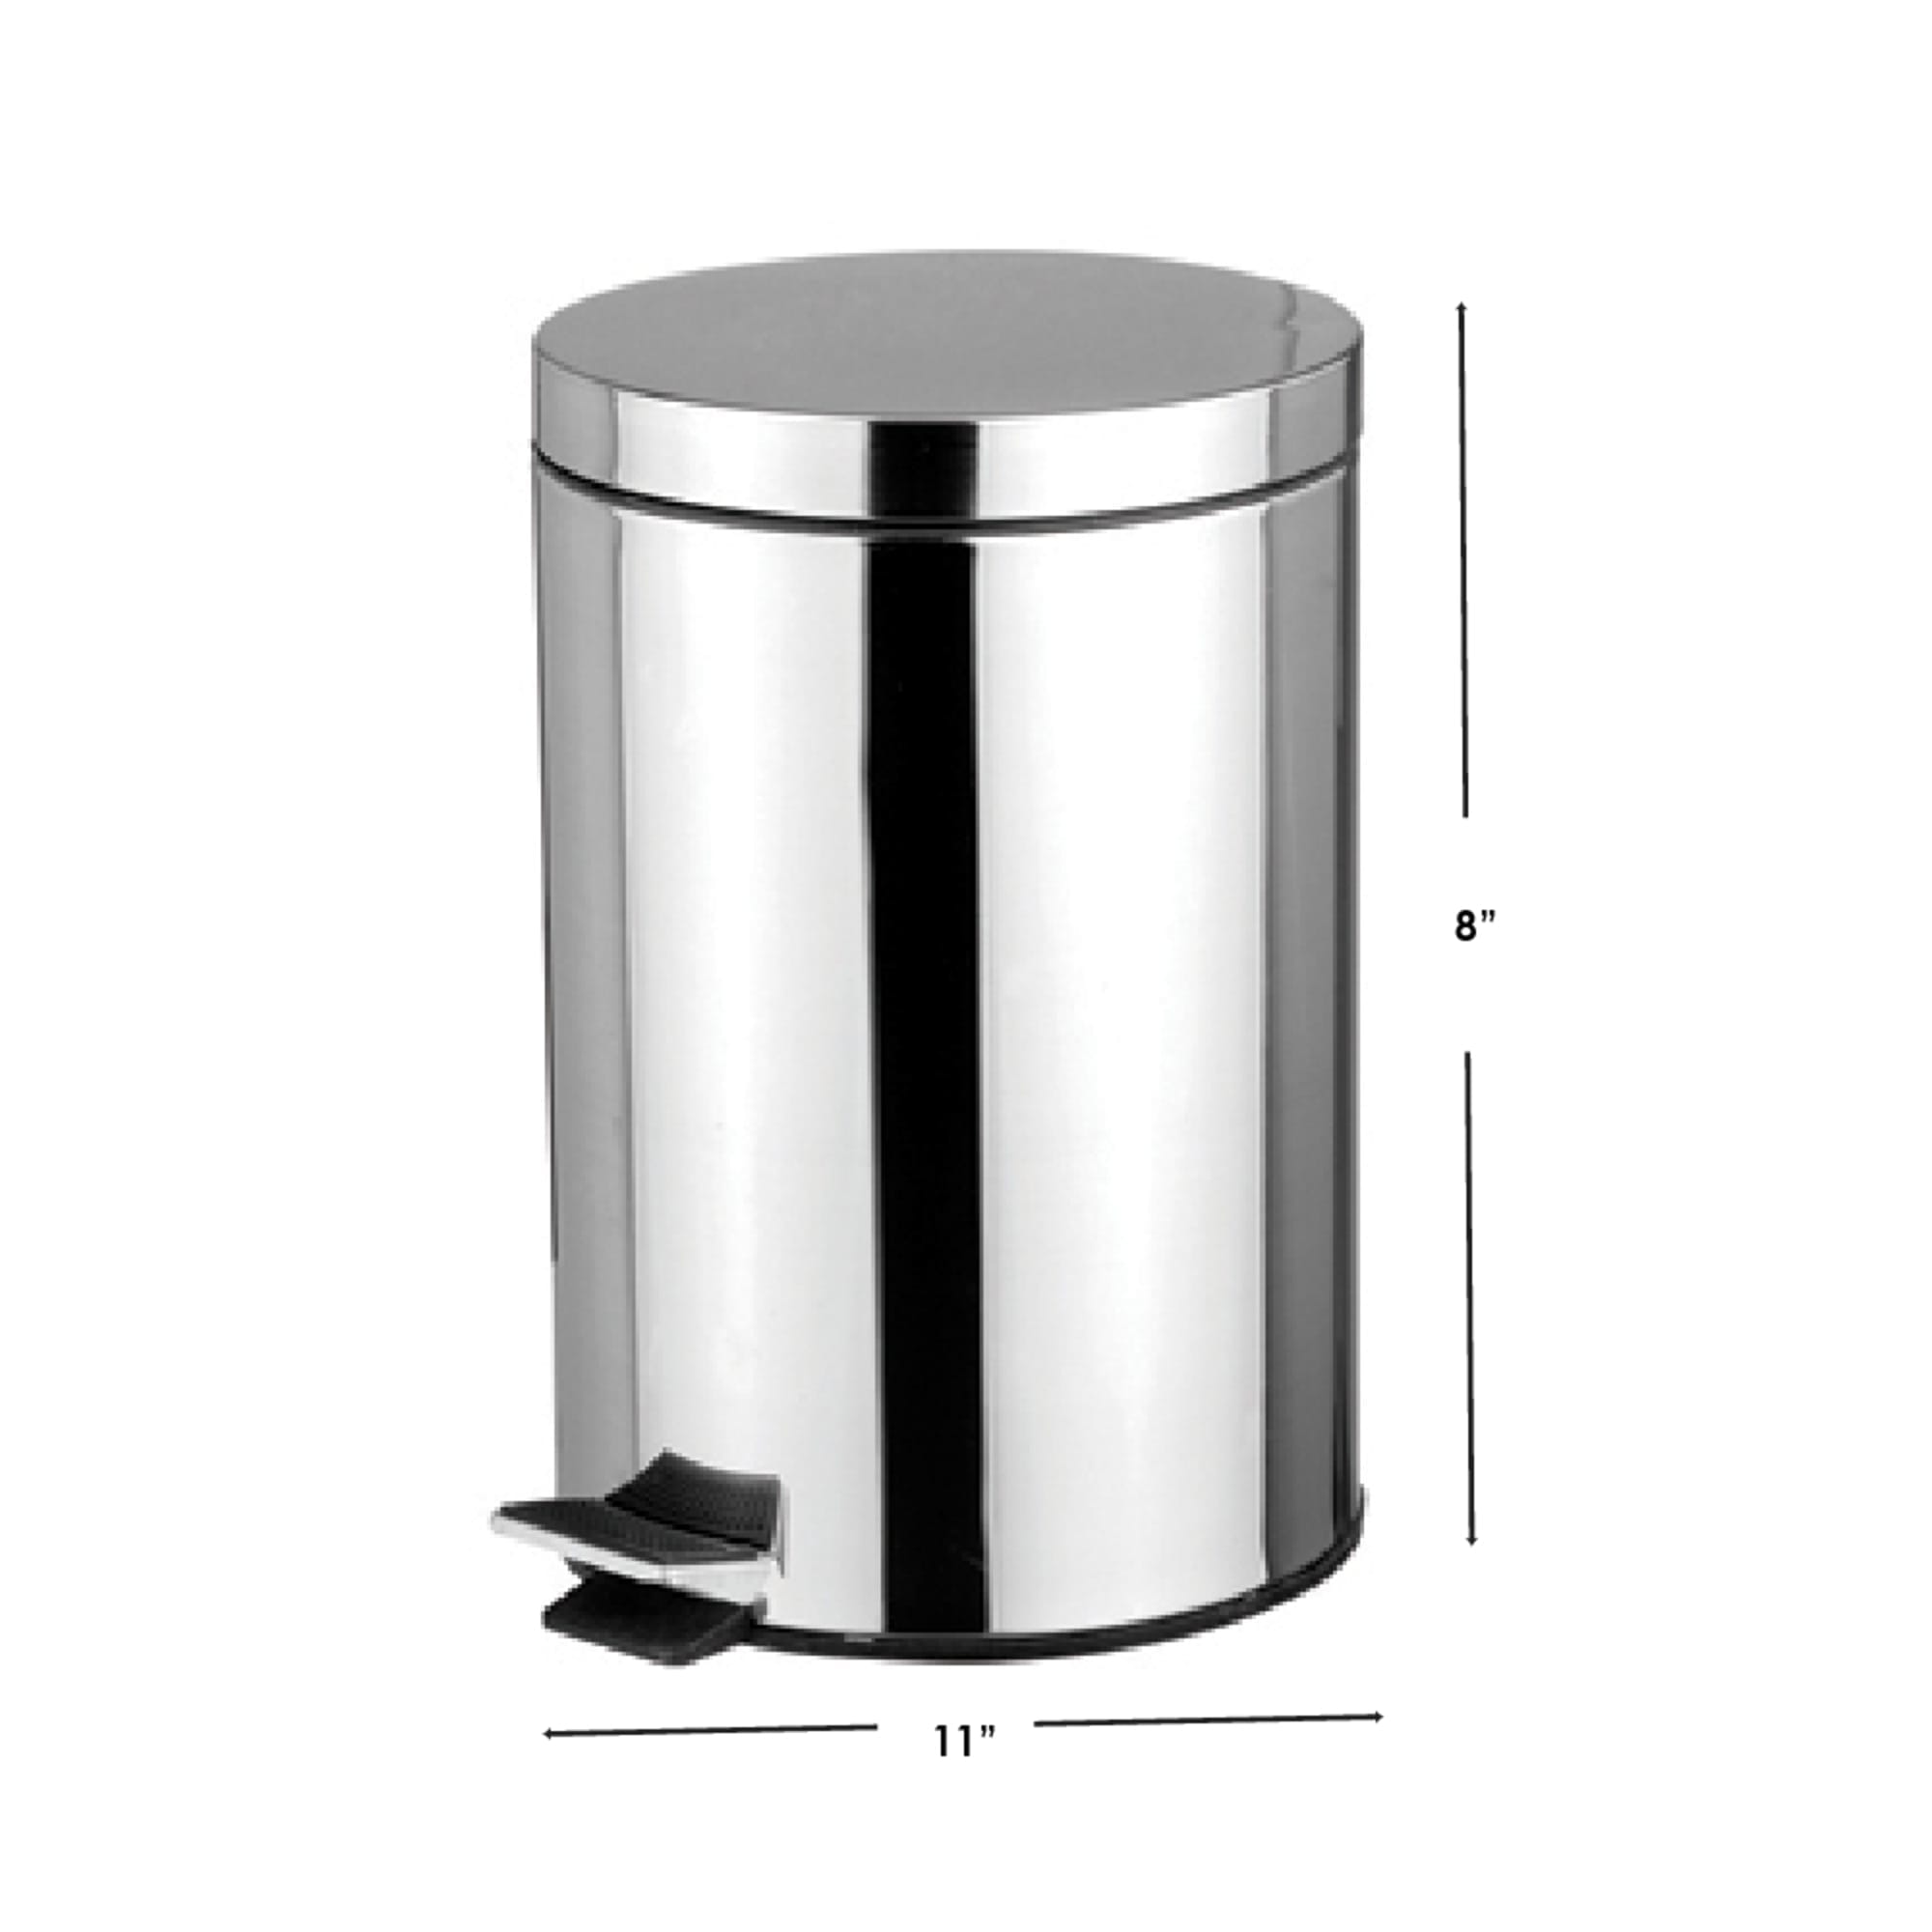 Home Basics  5 Liter Polished Stainless Steel Round Waste Bin, Silver $10.00 EACH, CASE PACK OF 12